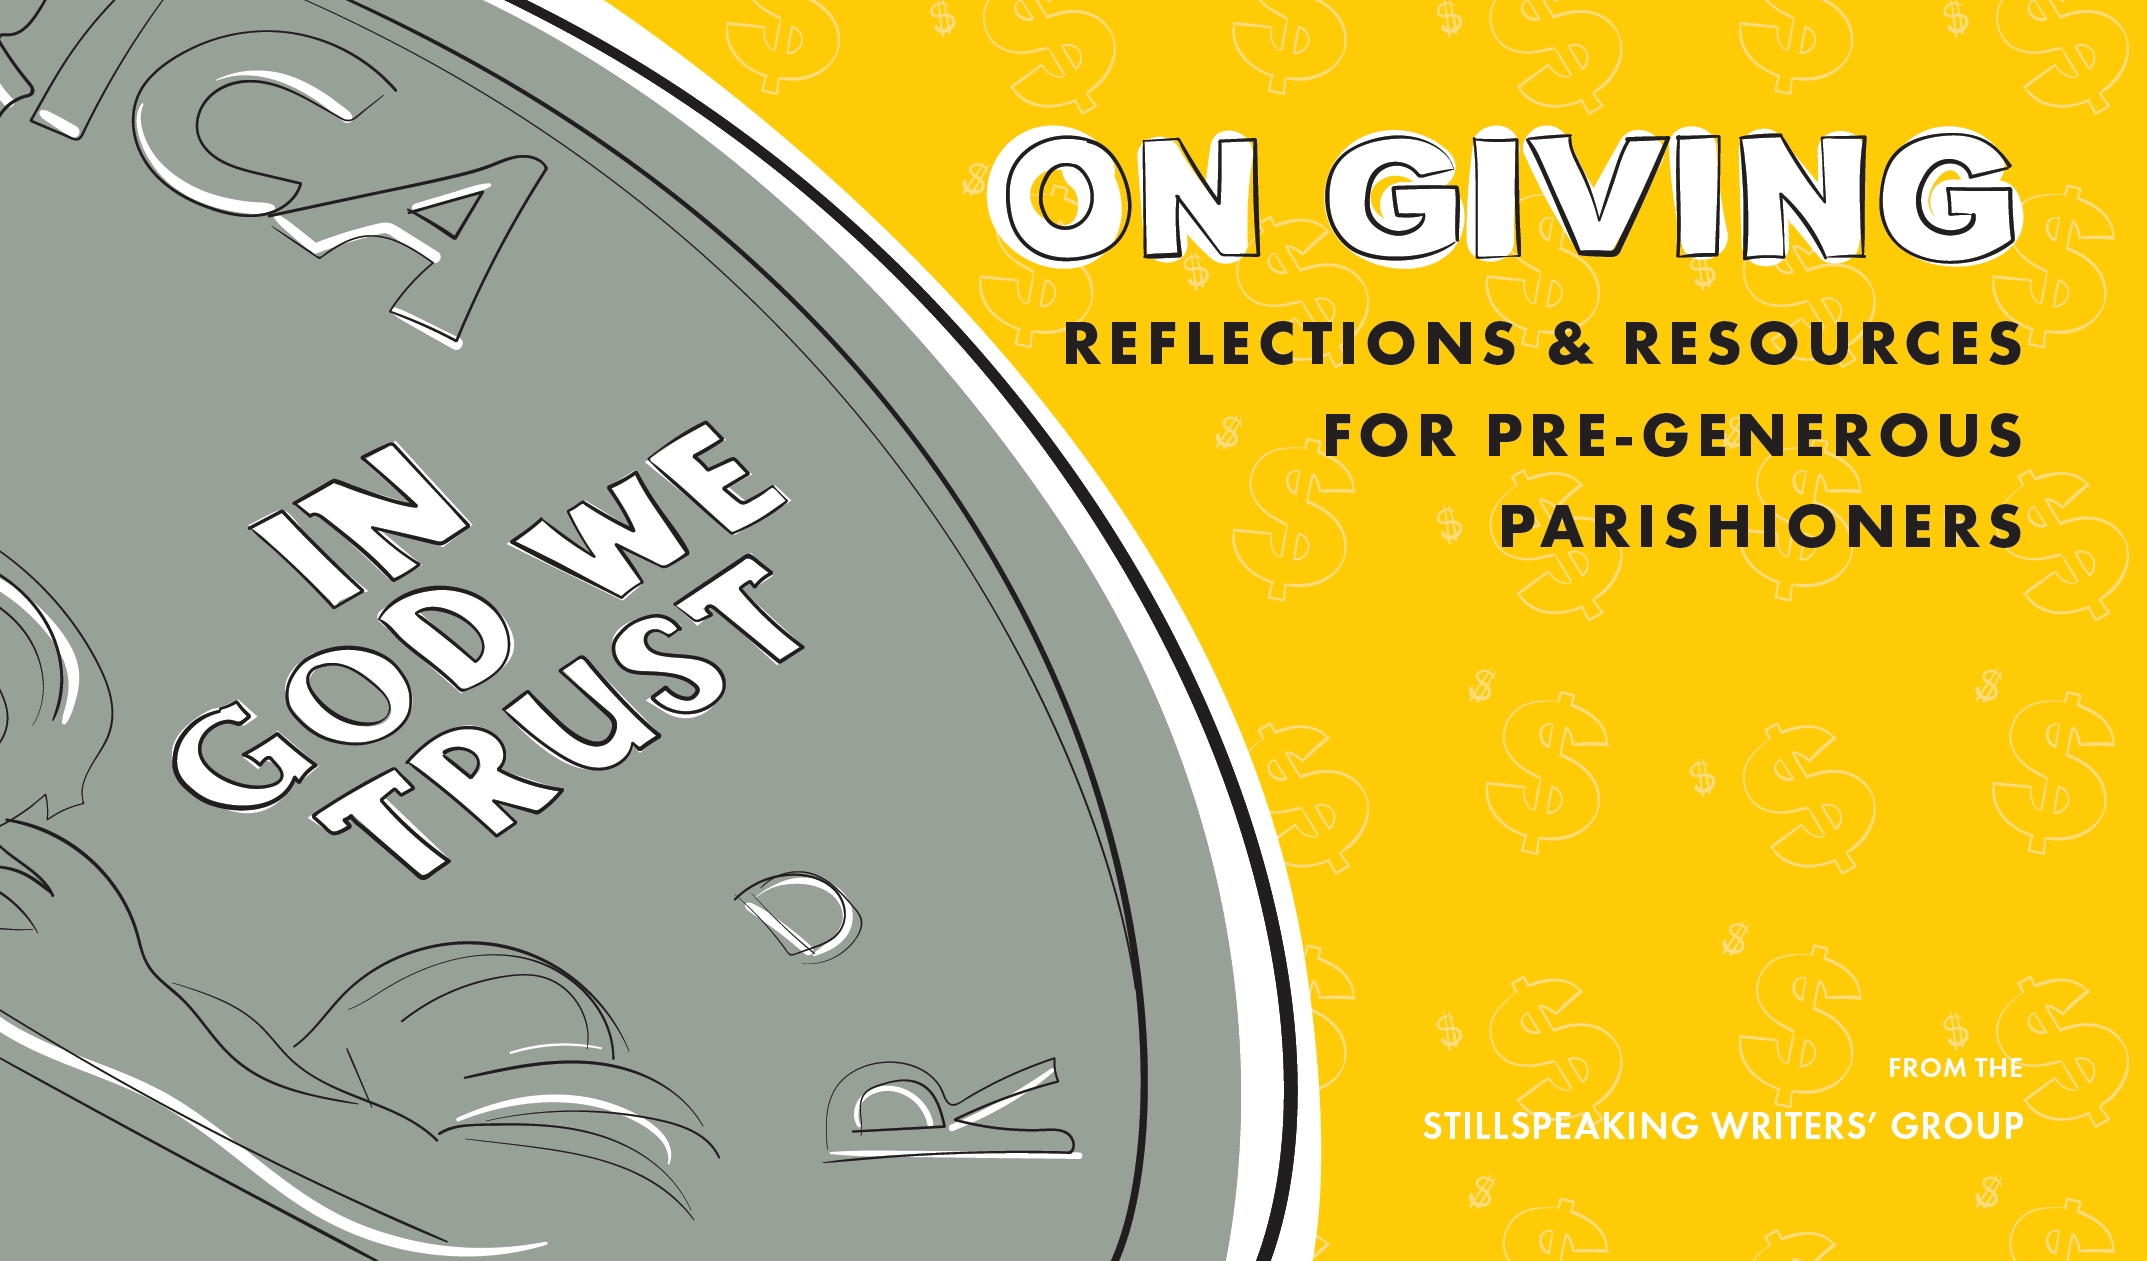 On Giving | Reflections & Resources for Pre-Generous Parishioners